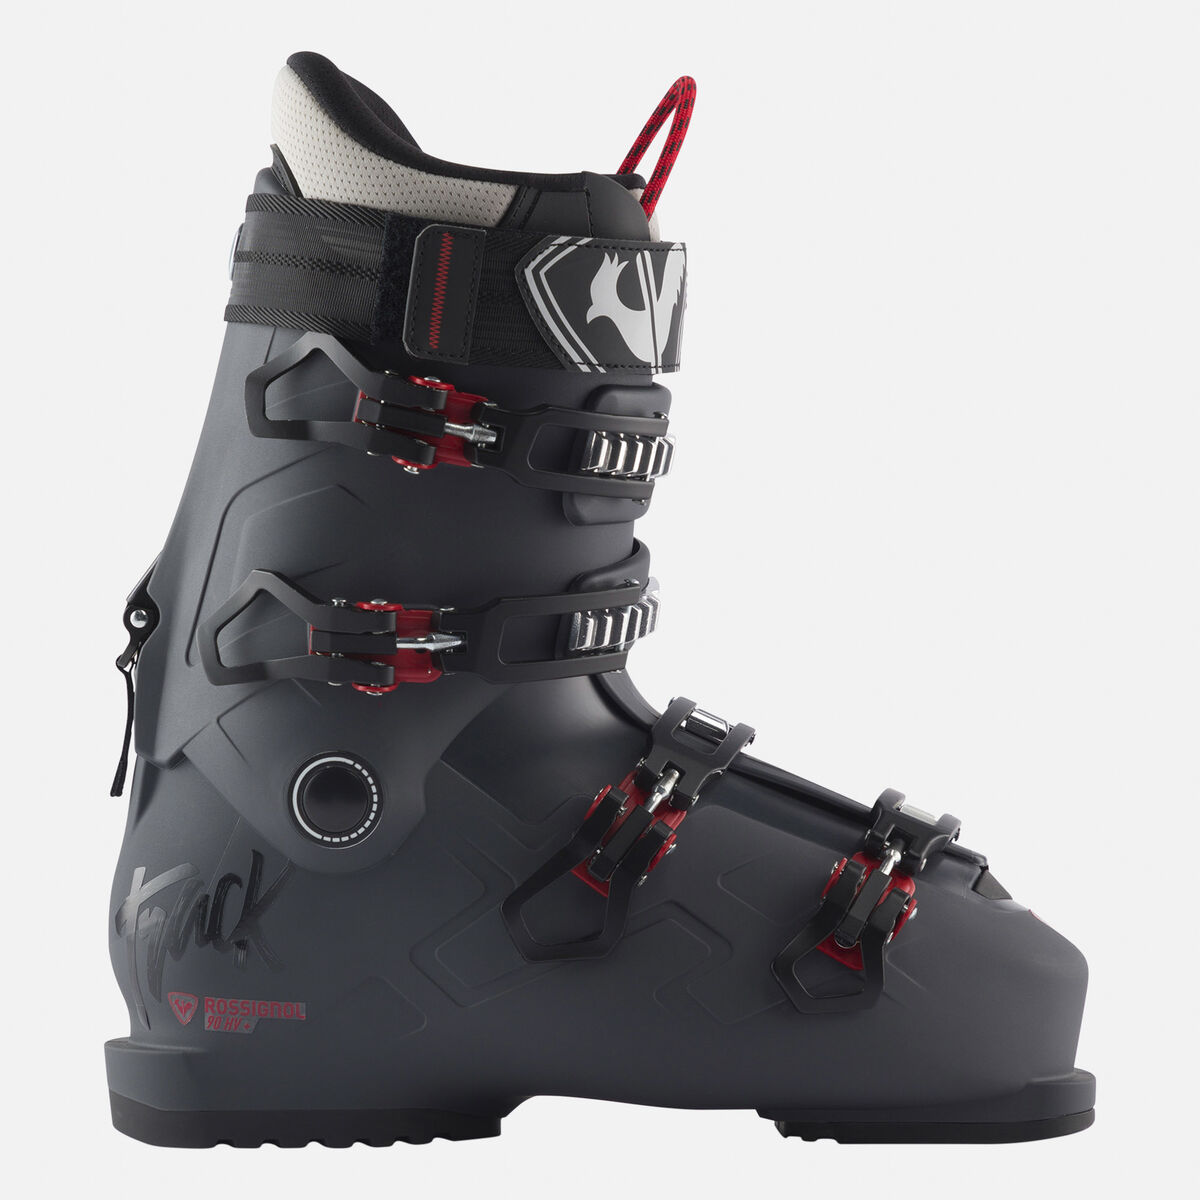 Chaussures de ski All Mountain homme Track 90 HV+